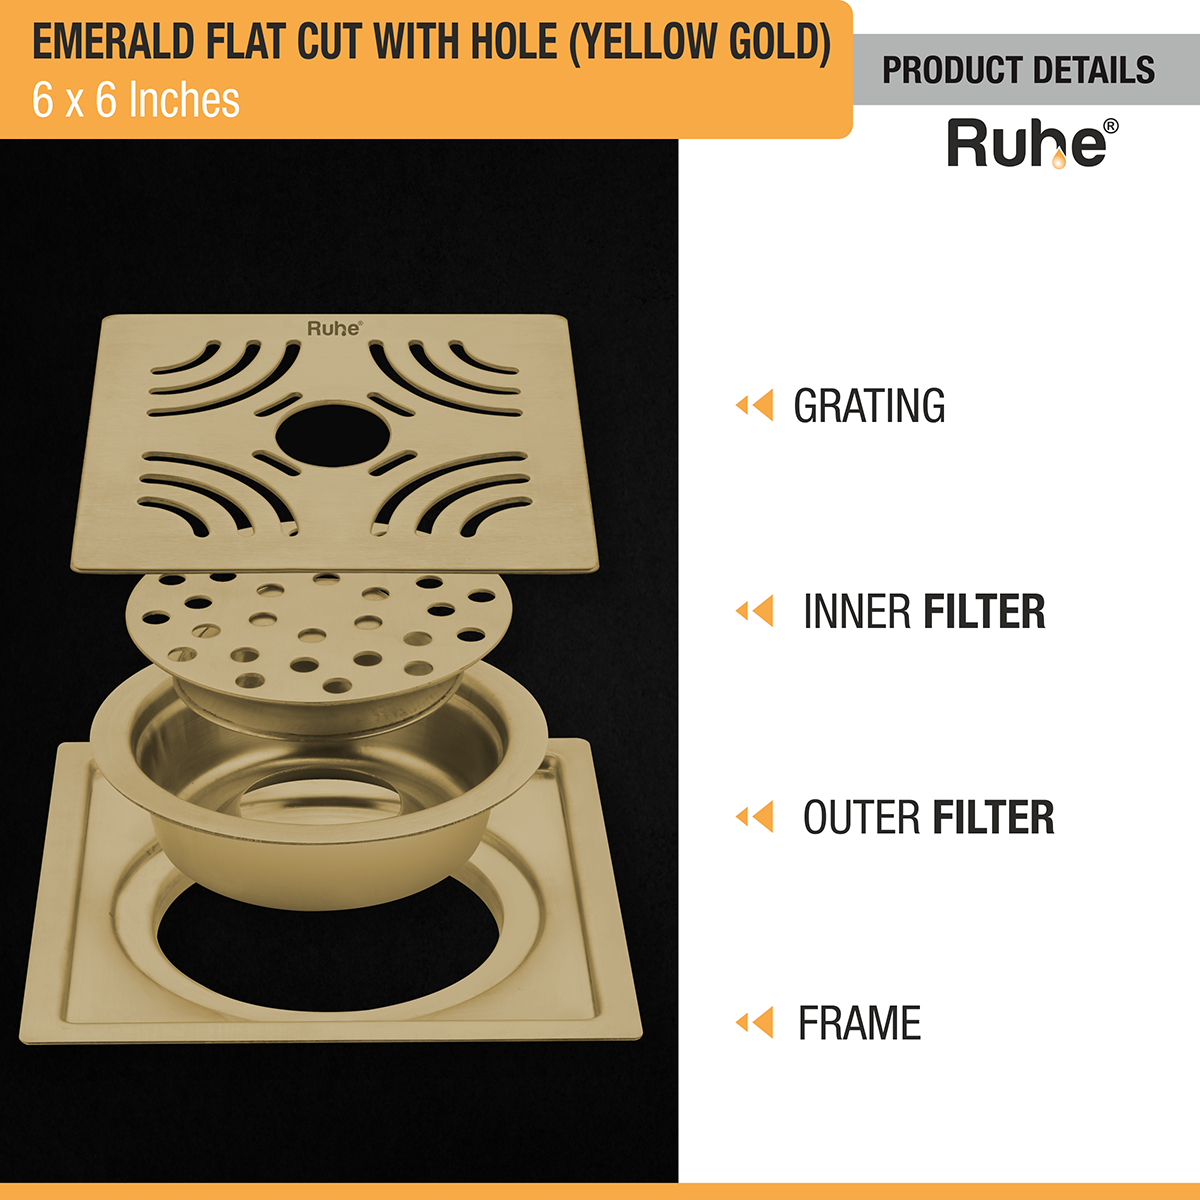 Emerald Square Flat Cut Floor Drain in Yellow Gold PVD Coating (6 x 6 Inches) with Hole product details